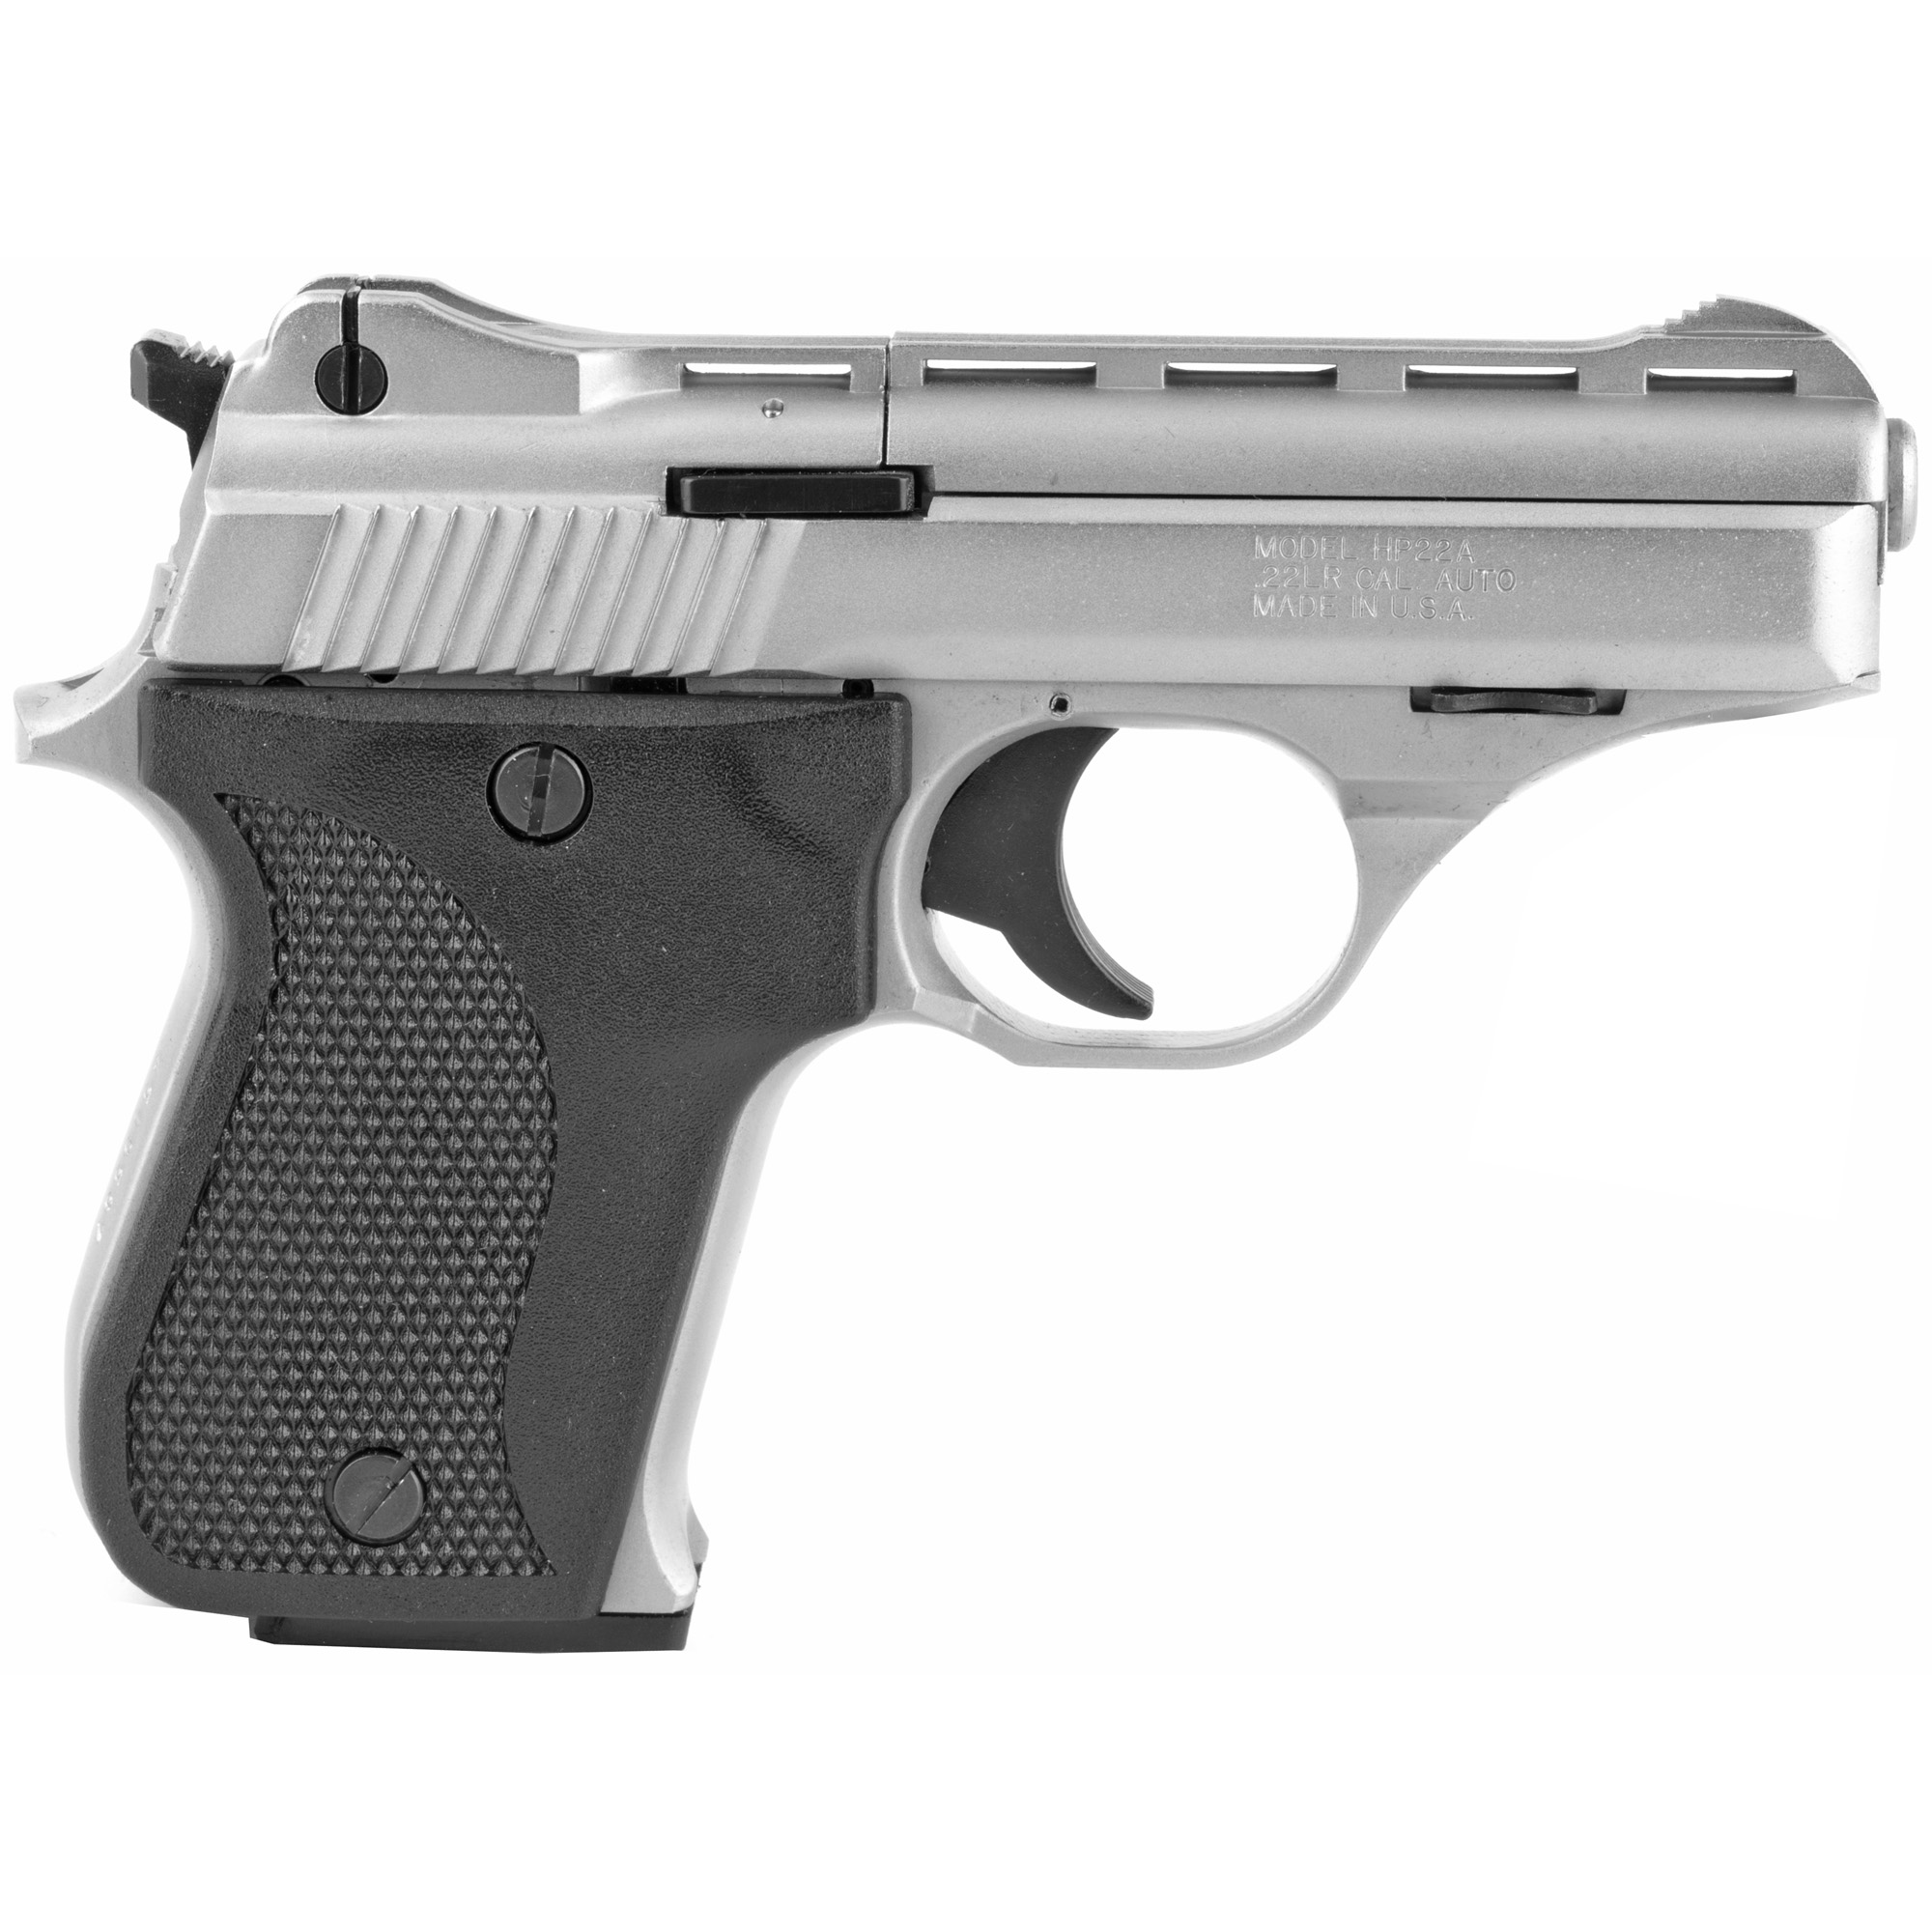 USED IN LIKE NEW CONDITION / Phoenix, HP22A, Single Action, Semi-automatic, Metal Frame Pistol, Compact, 22LR, 3" Barrel, Alloy, Nickel Finish, Silver, Plastic Grips, Adjustable Sights, 10 Rounds, 1 Magazine